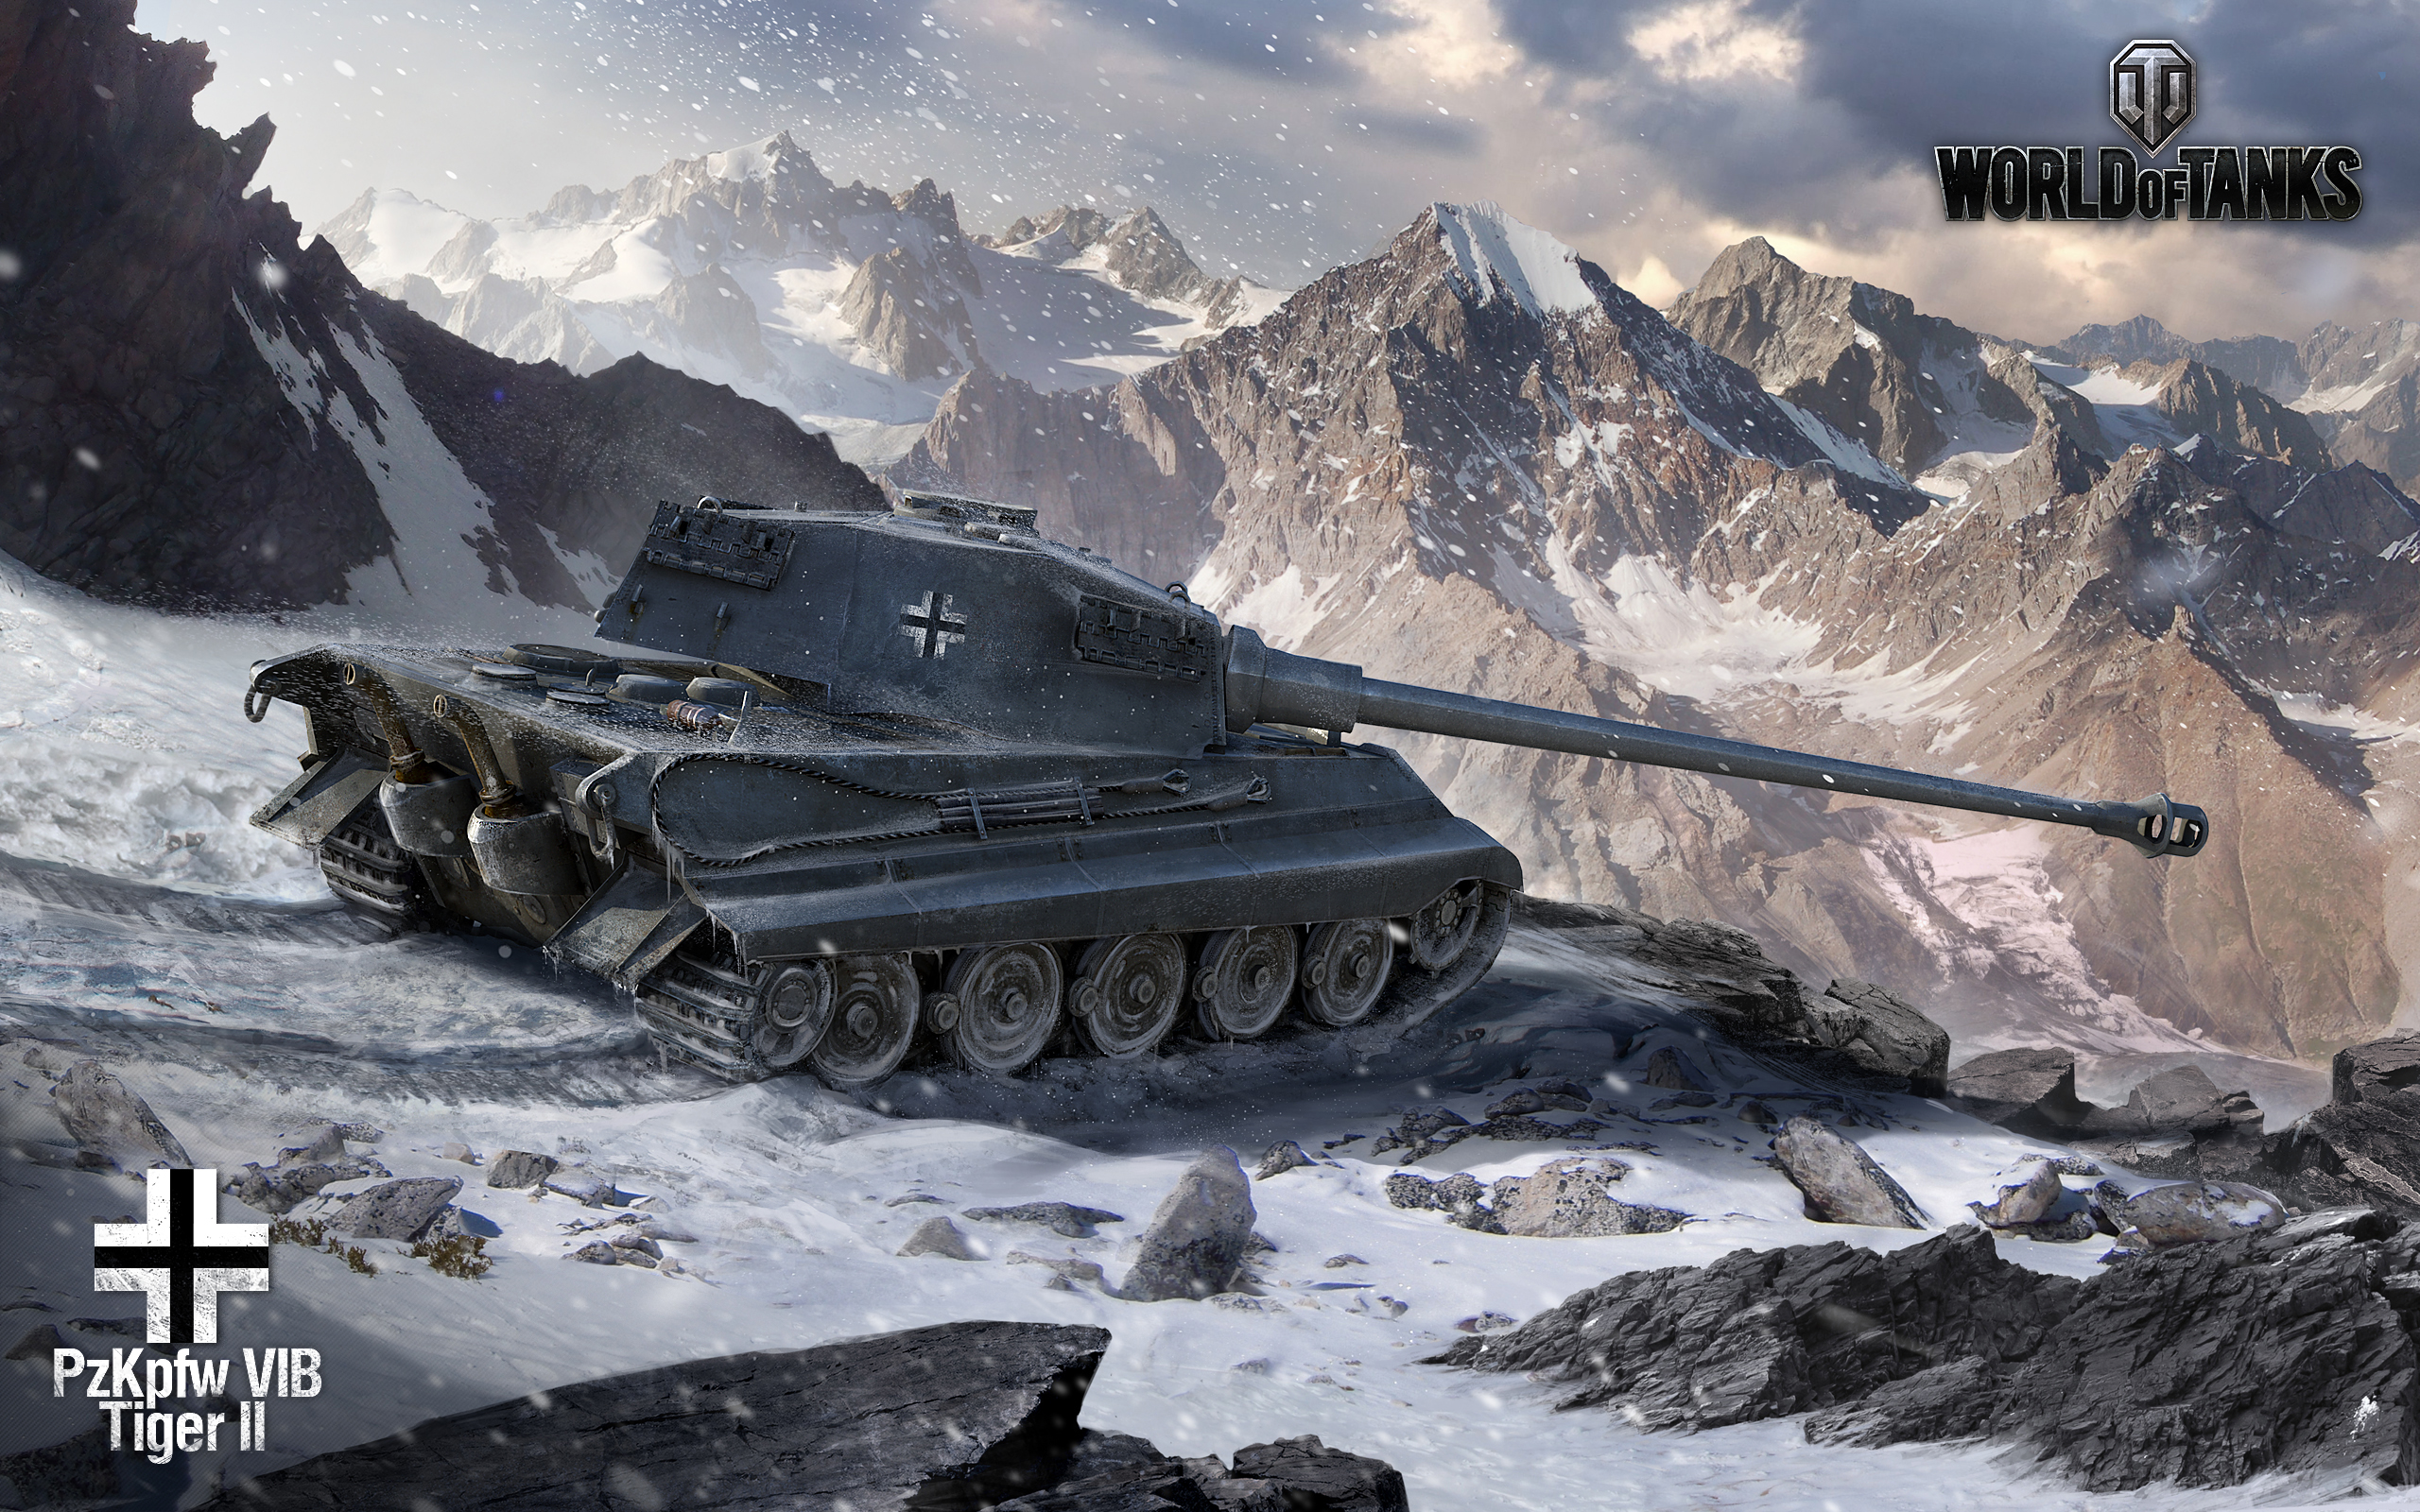 Free Download World Of Tanks King Tiger Wallpapers Hd Wallpapers 2560x1600 For Your Desktop Mobile Tablet Explore 45 Hd World Of Tanks Wallpapers World Of Tanks Wallpaper 19x1080 Tank